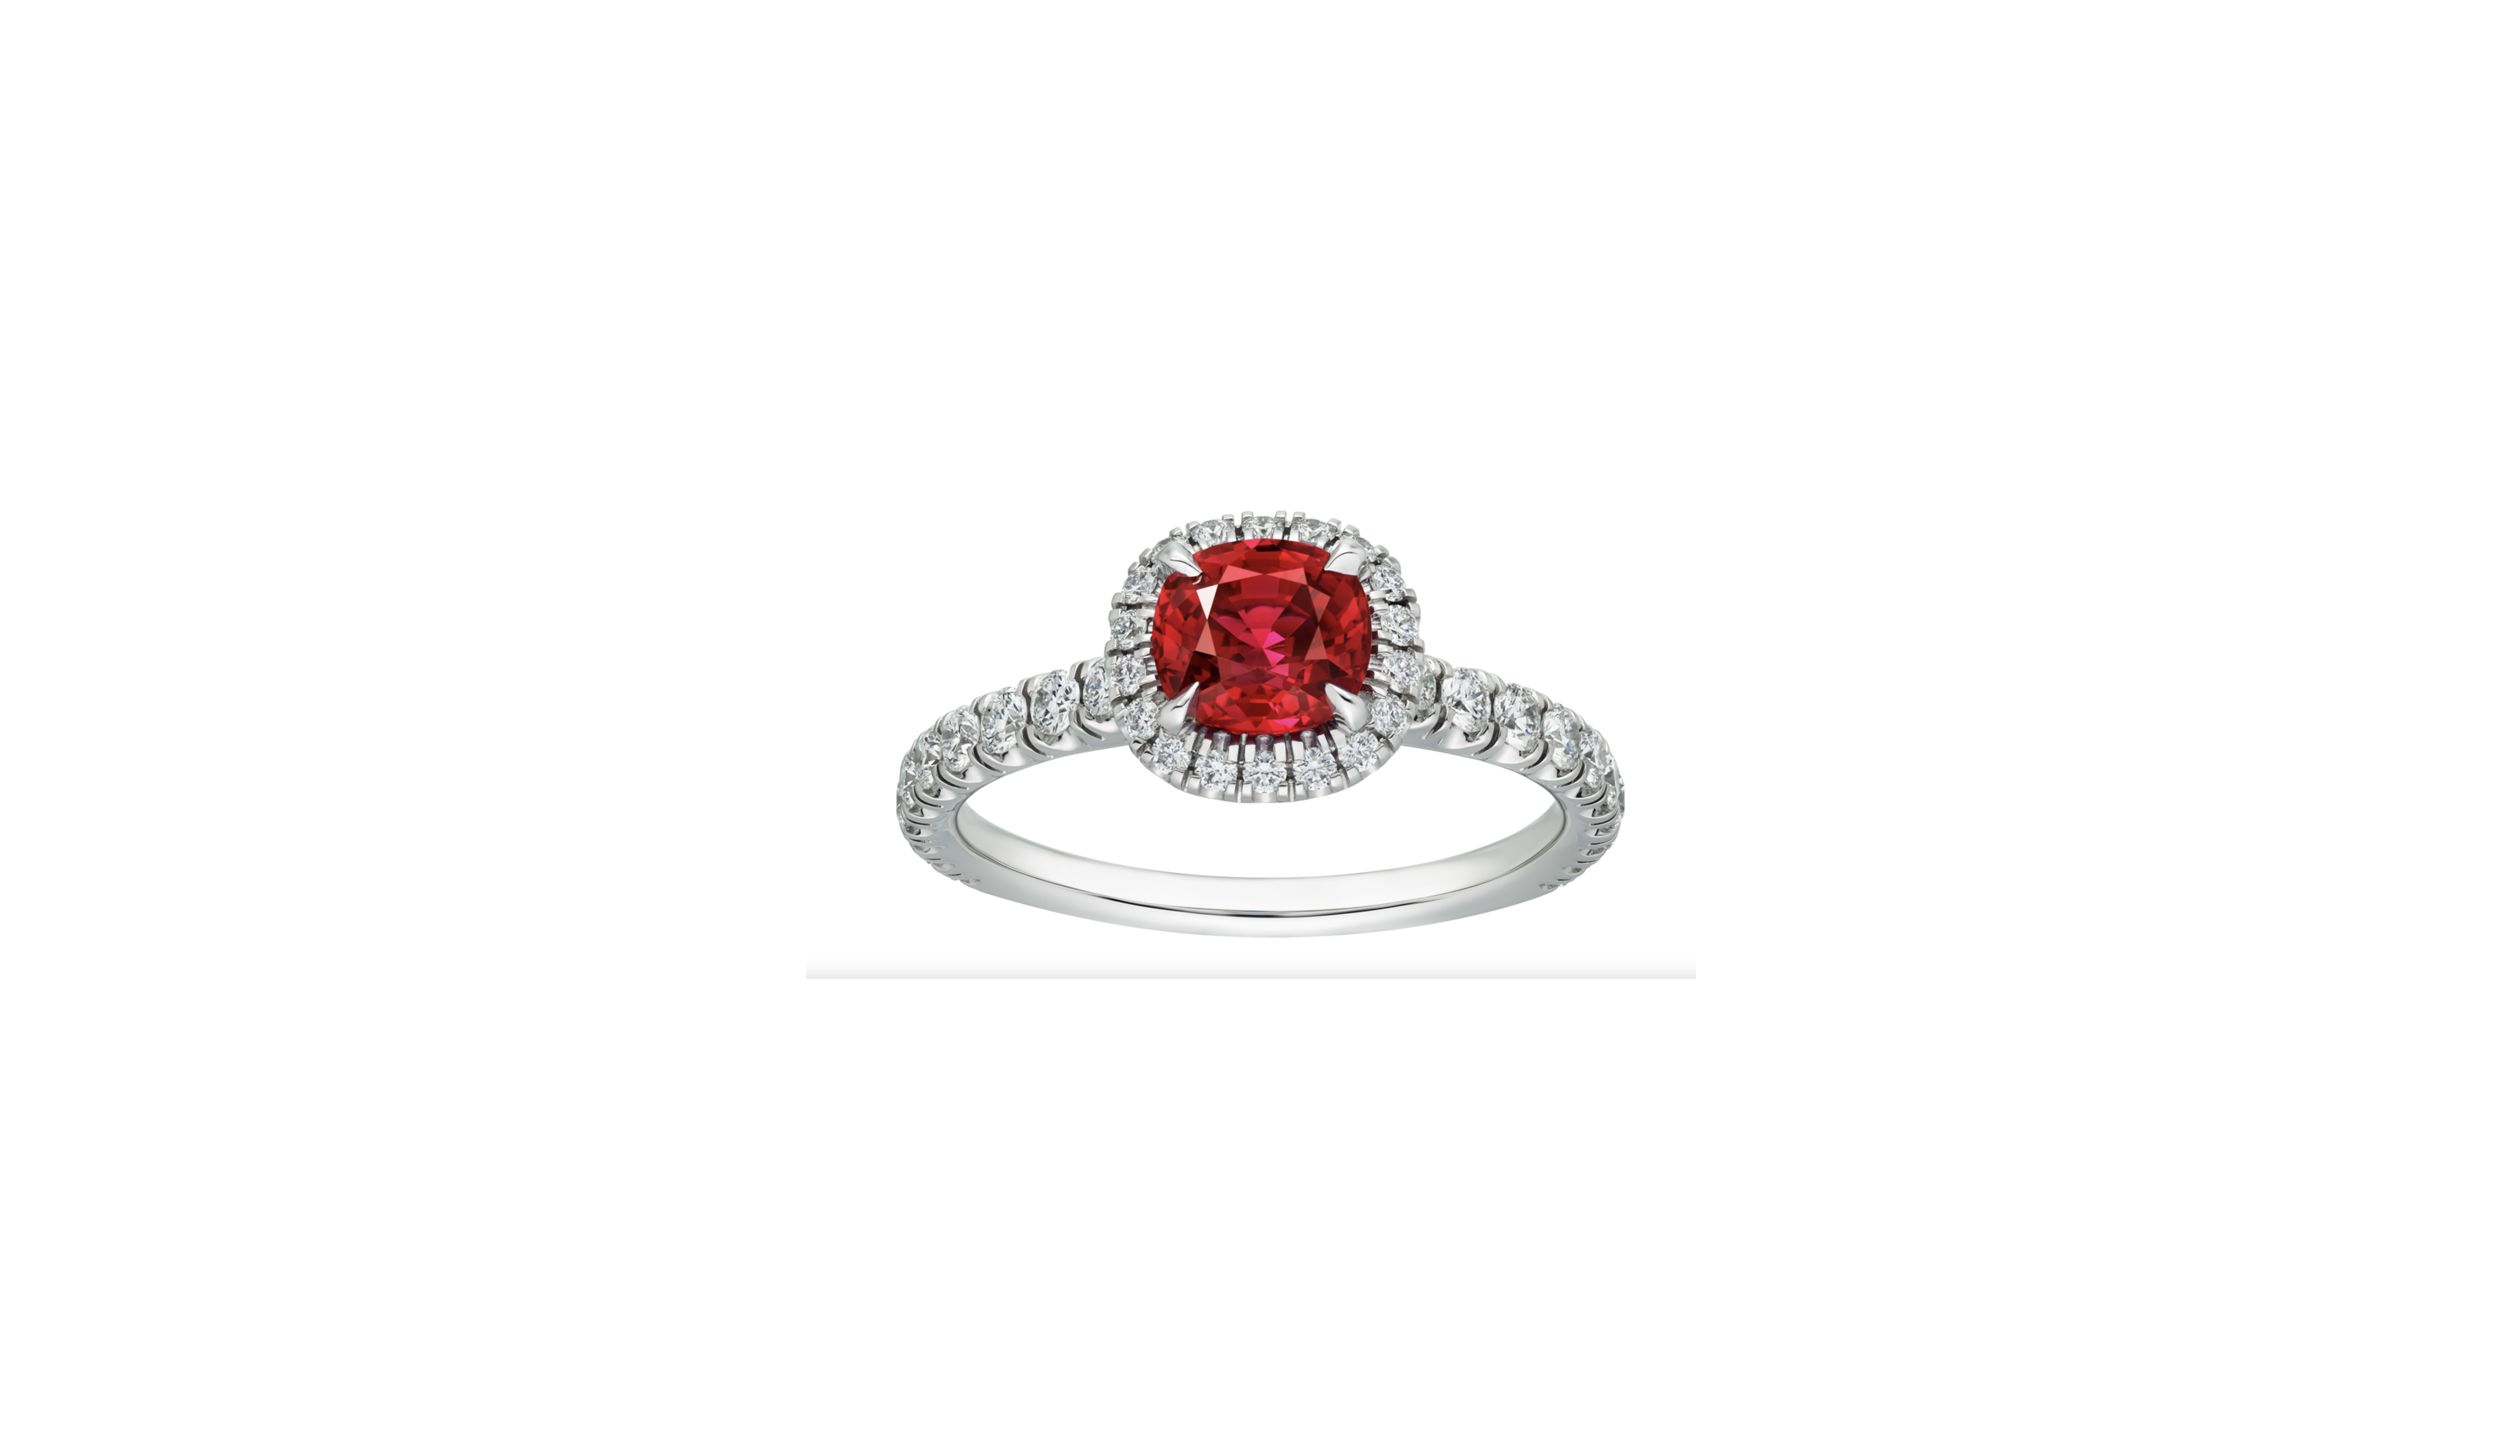 T&F-Jewelry Fashion Red Ruby Jewelry Vintage Engagement Rings For Women Wedding Bridal rings